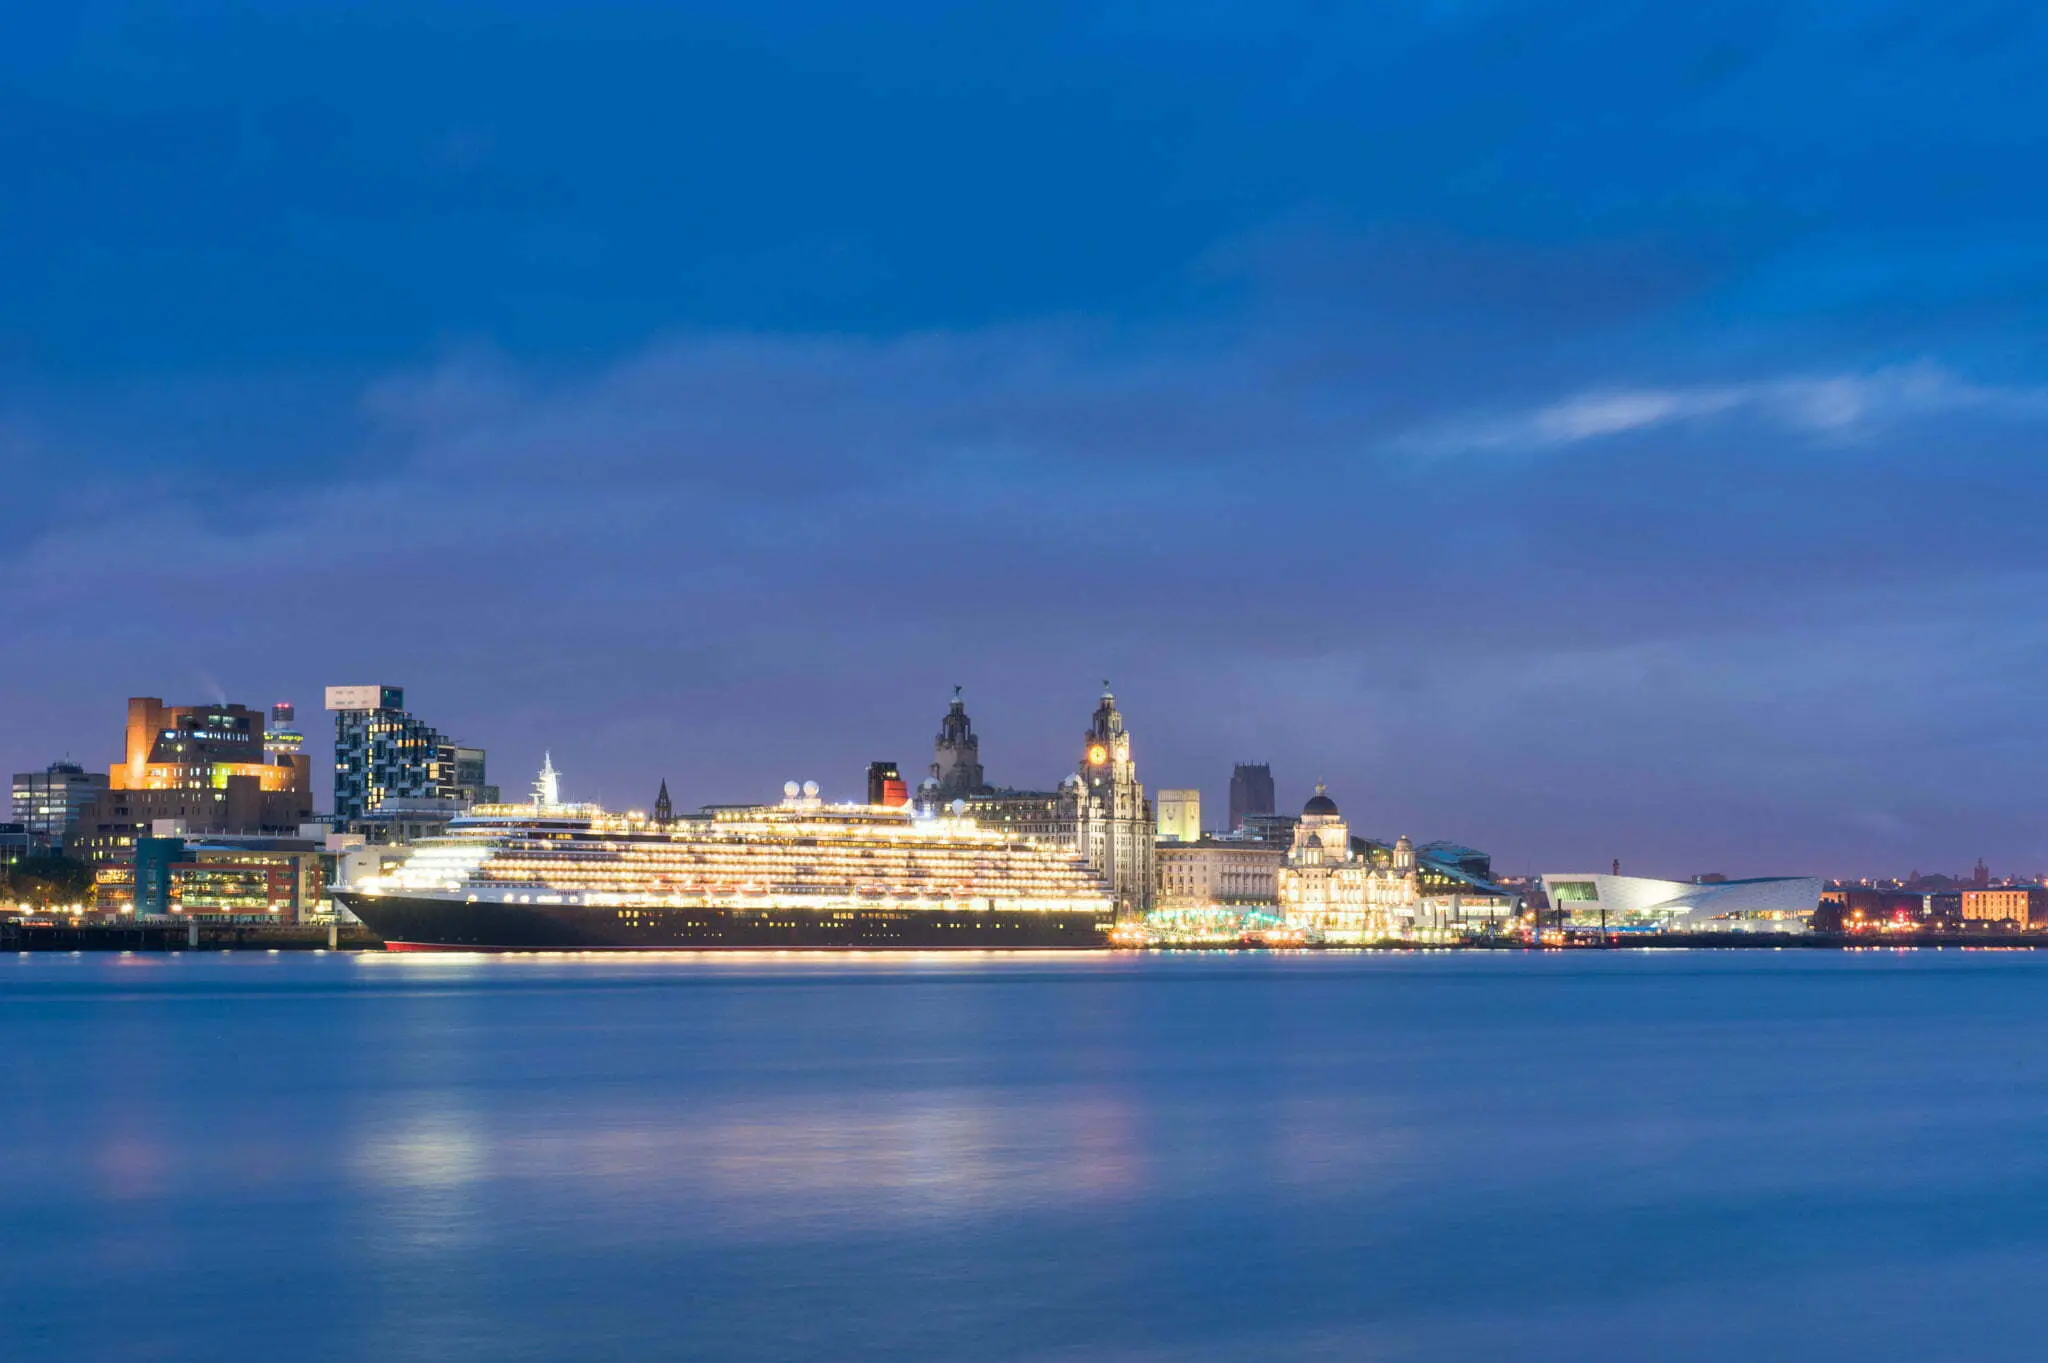 Queen Victoria docked against the Liverpool skyline